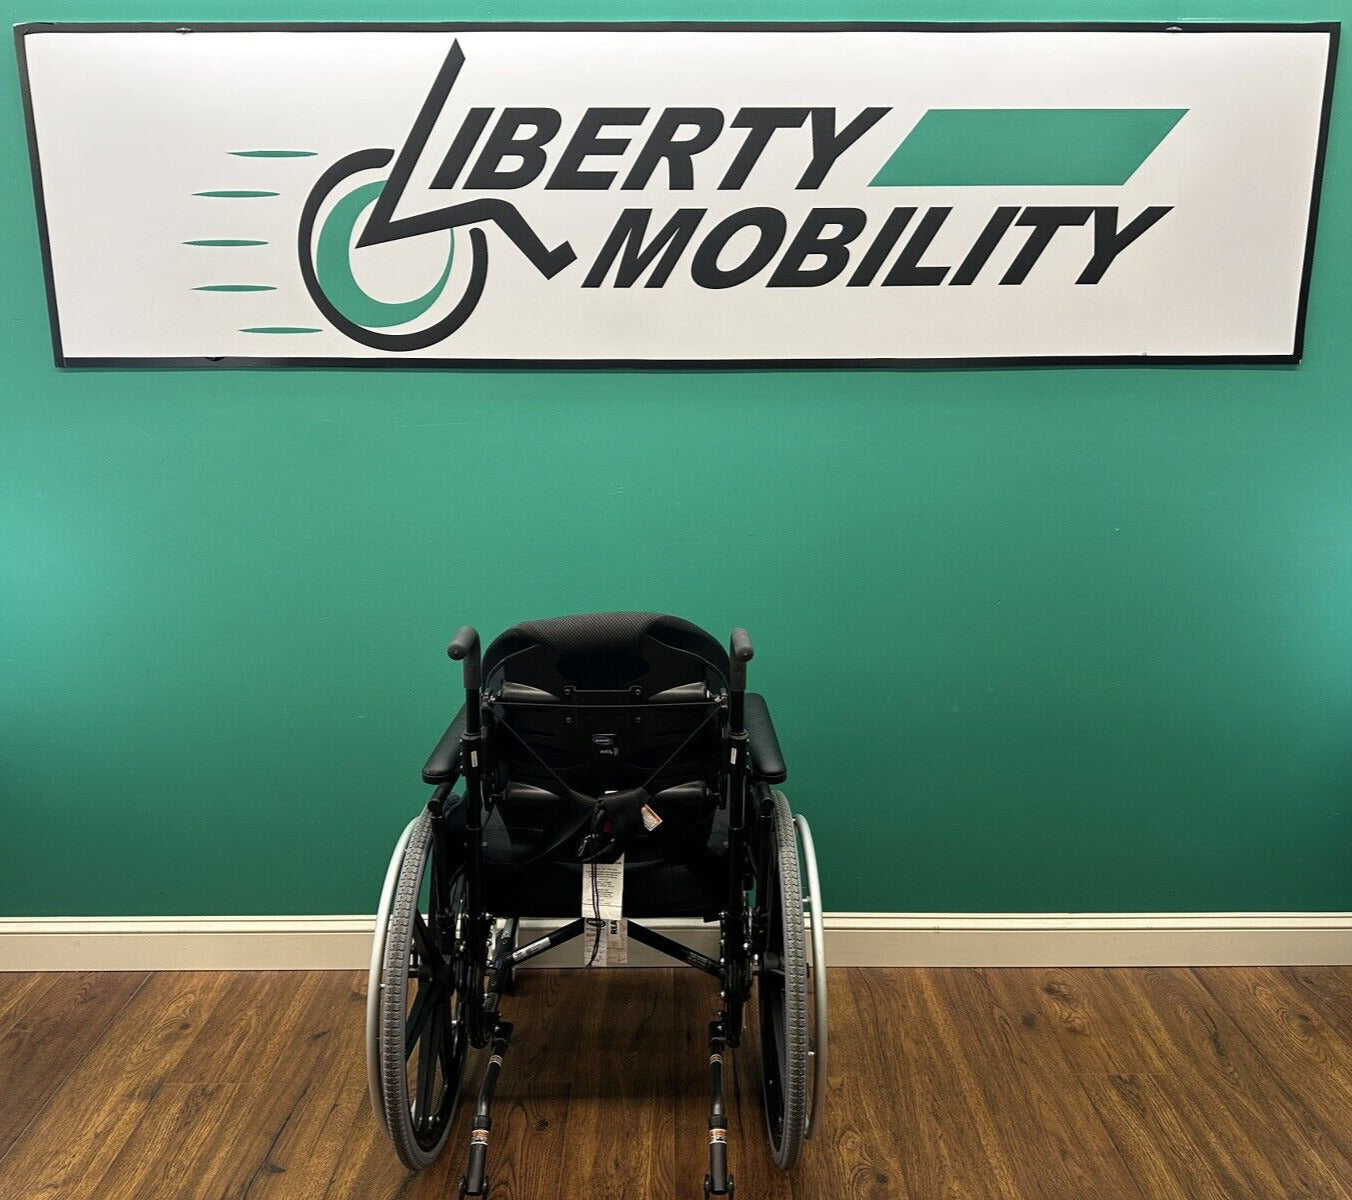 2019 Invacare ProSpin X4S Ultralight Manual Wheelchair -Seat: 18" x 19" #LM7386